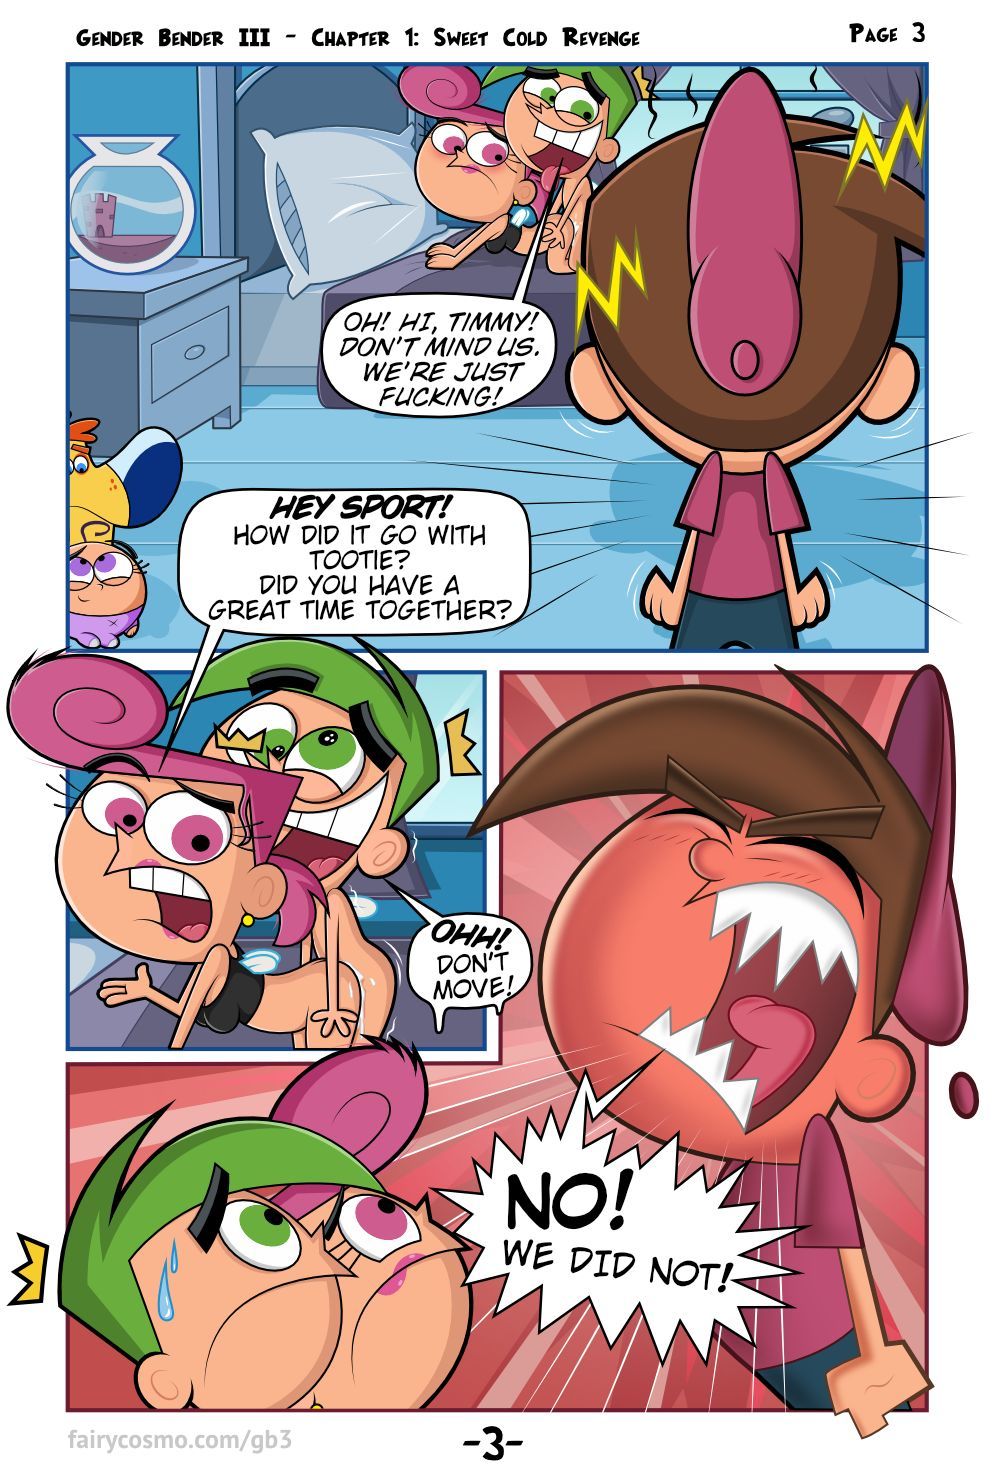 Gender Bender III Fairly Odd Parents by FairyCosmo Page 4 - Free Porn Comic...